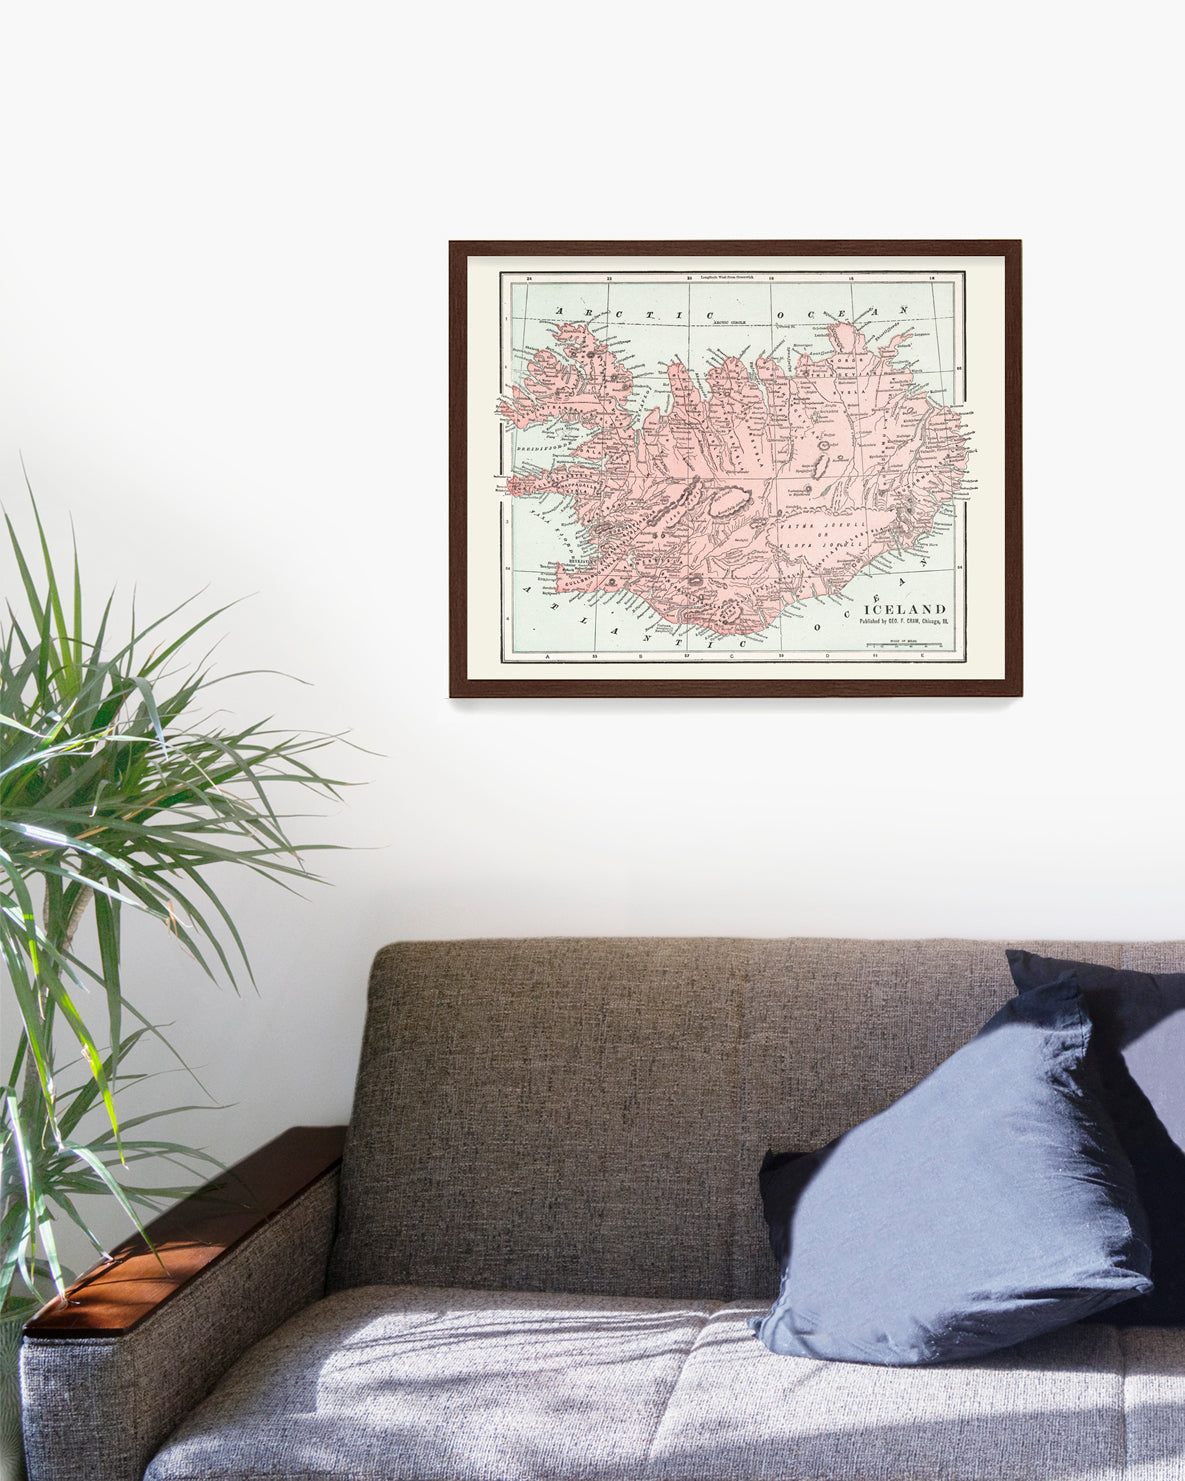 Iceland Map, Iceland Home, Map Wall Art